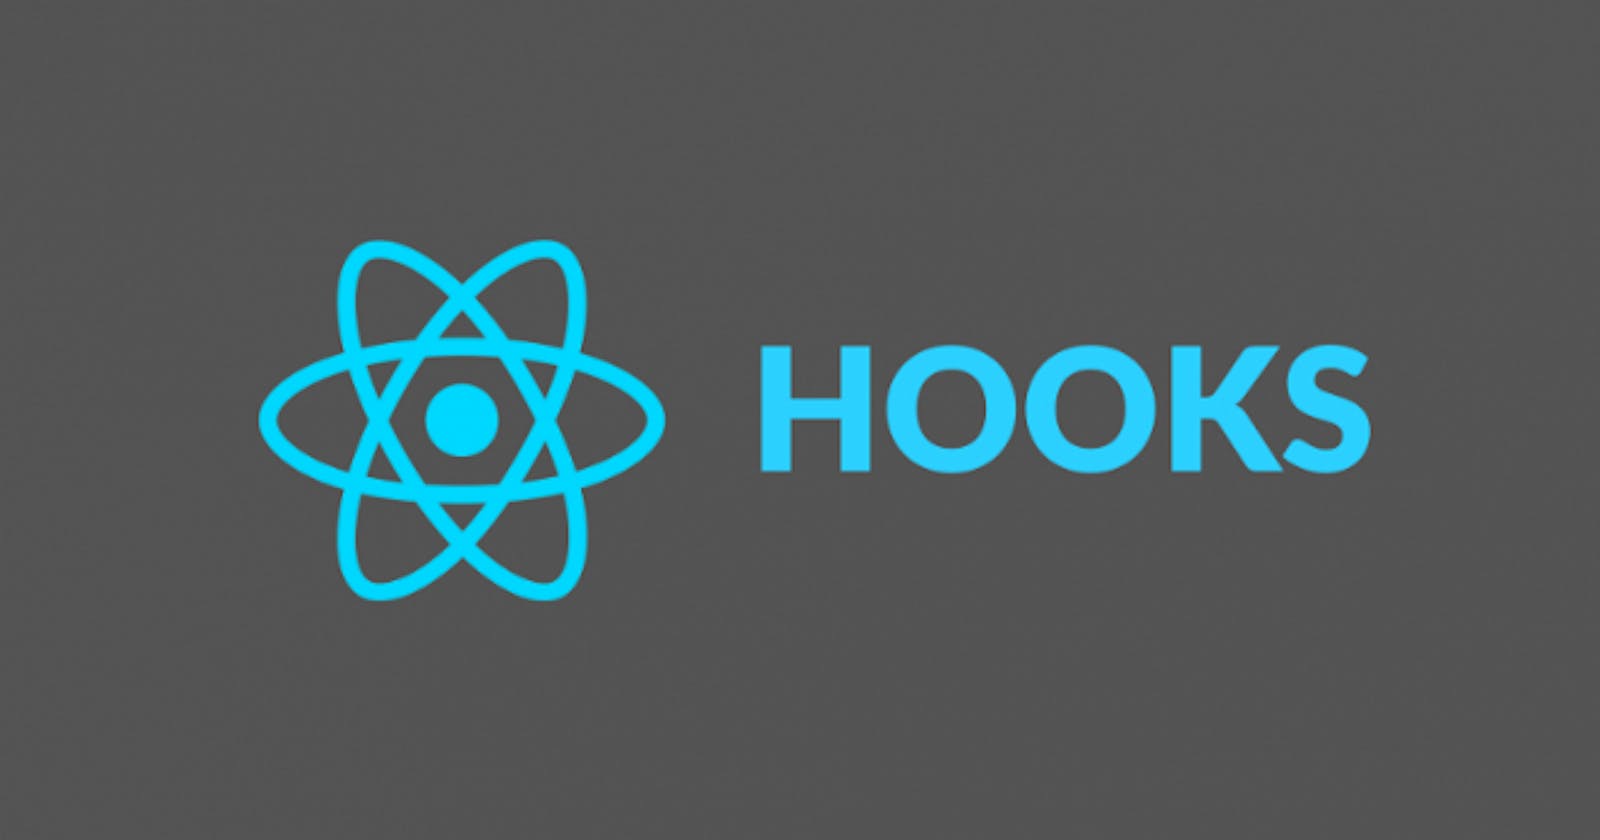 A Complete Introduction to React Hooks